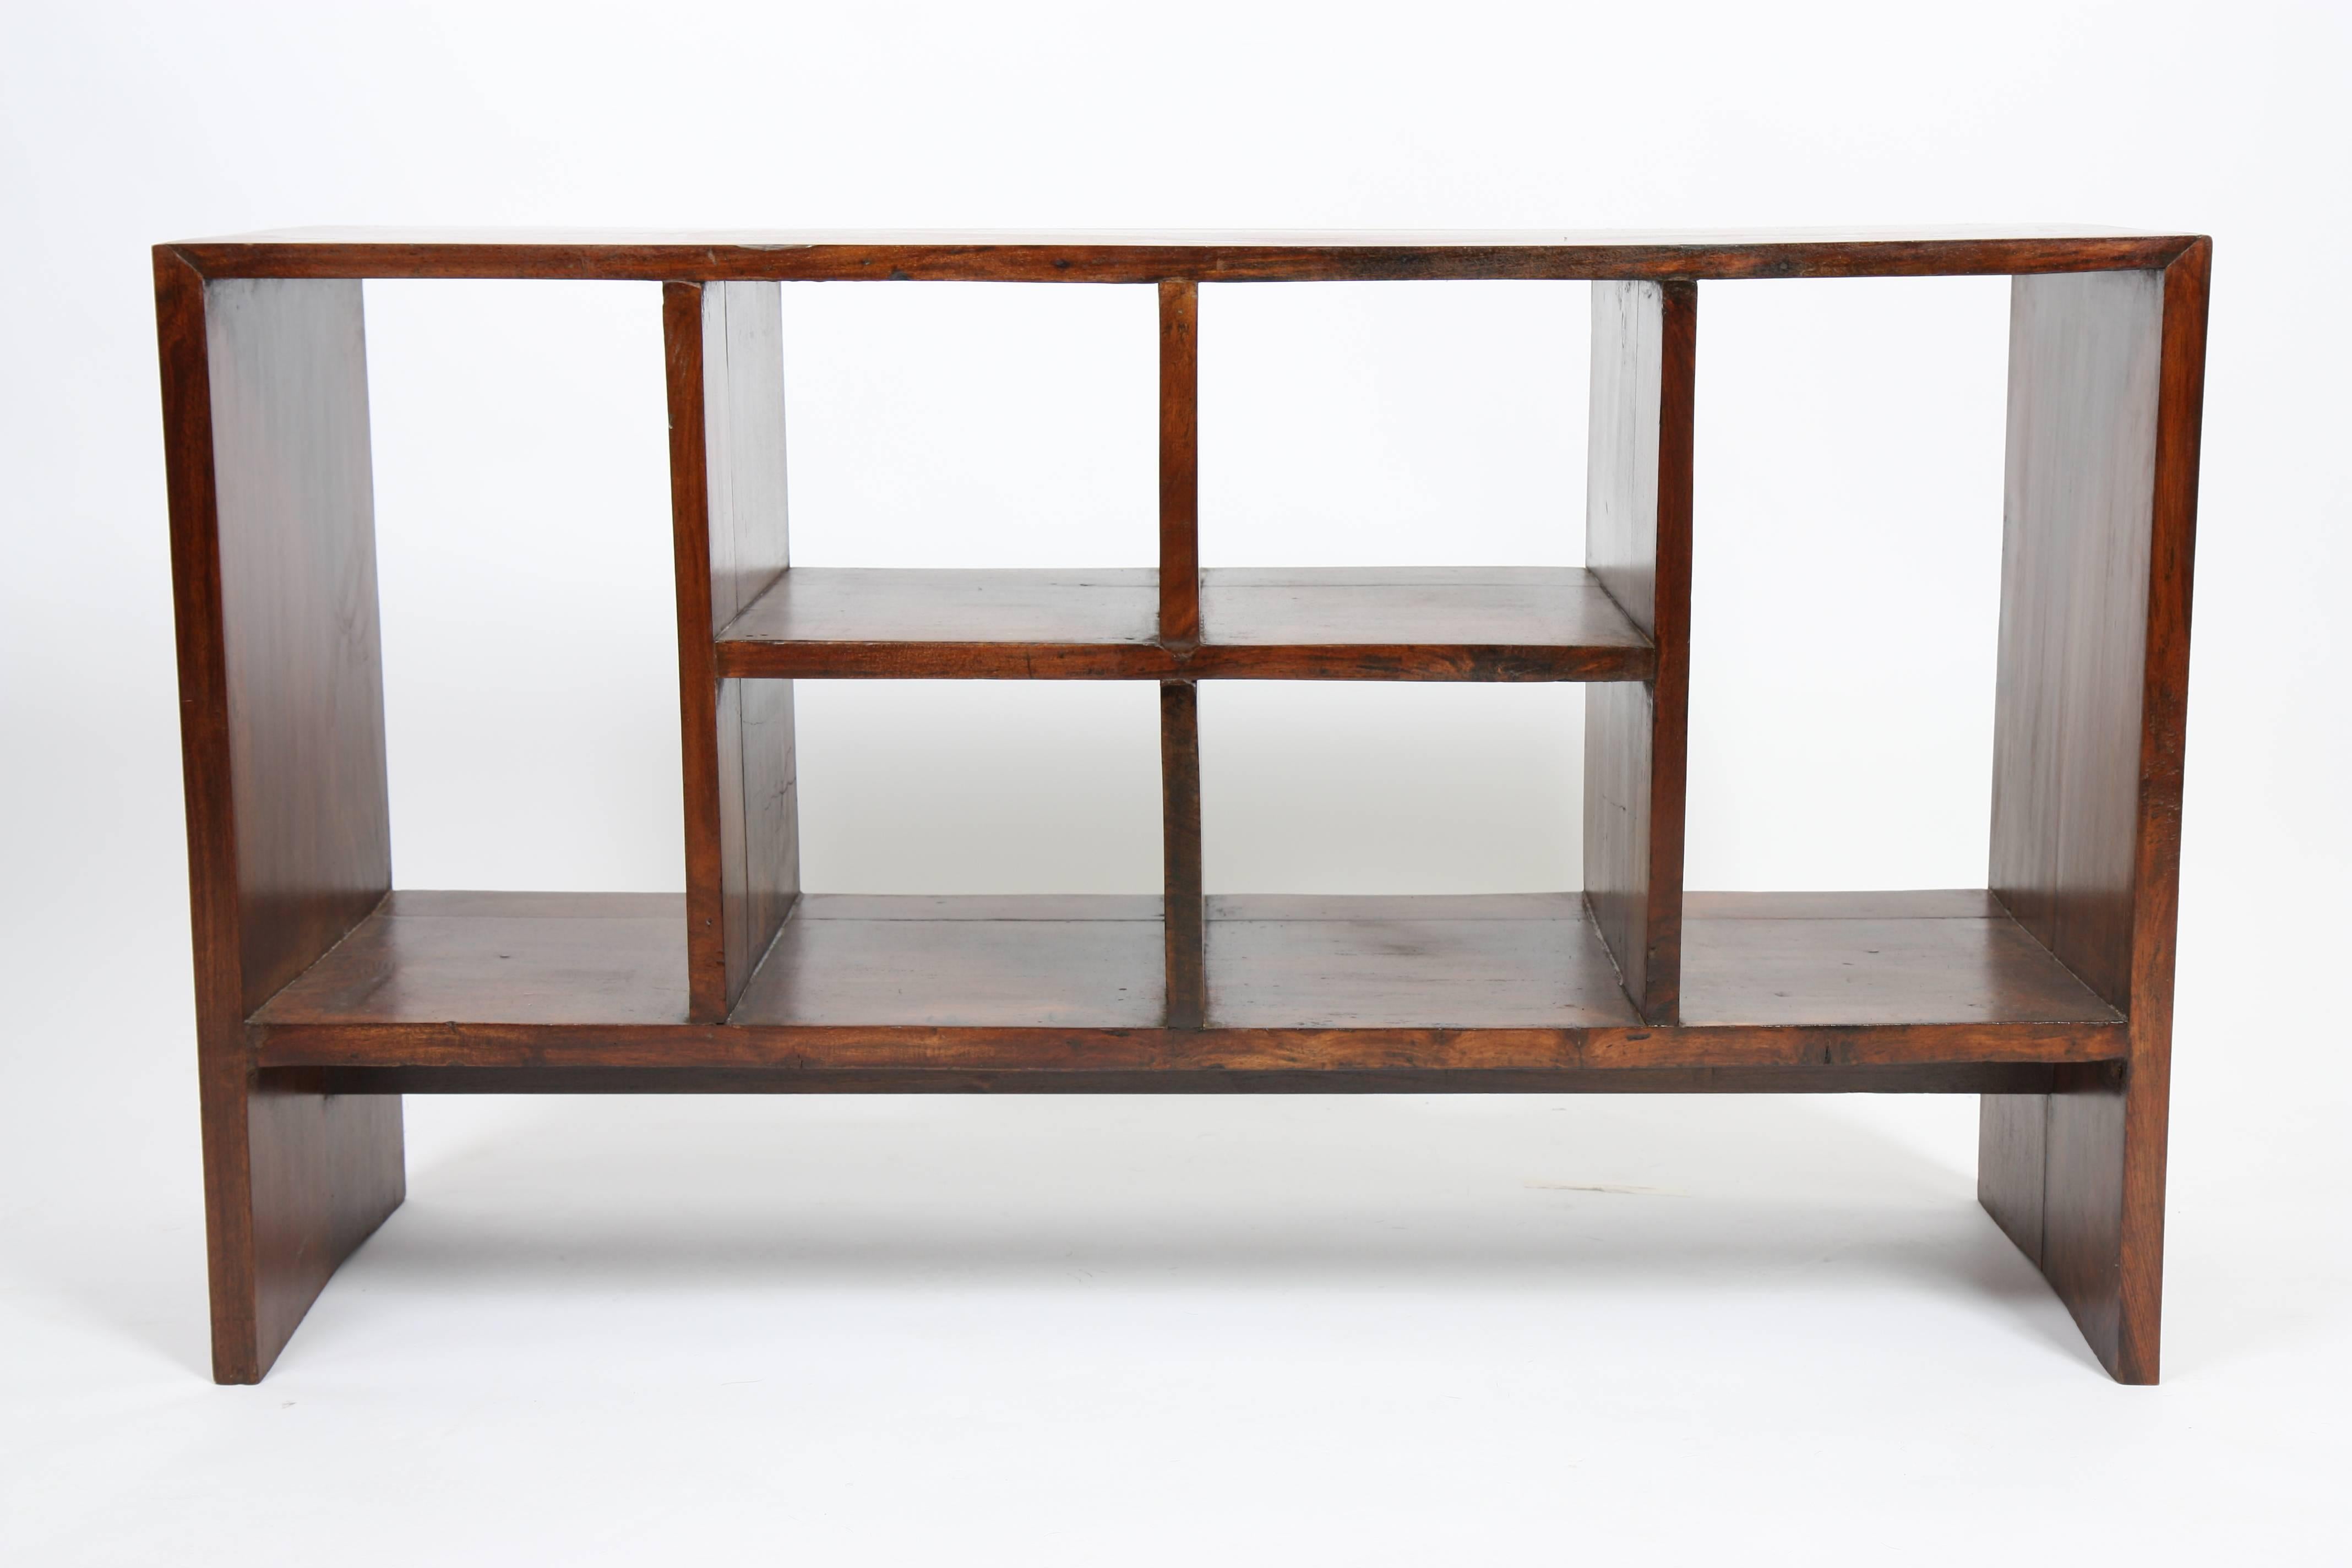 Pierre Jeanneret (1896-1967).
Low double face "File Rack" storage in solid sisso (Indian rosewood).
Six opened bookcase compartments, with four central and two higher lateral.
Base formed by the two side panels of the frame,
circa